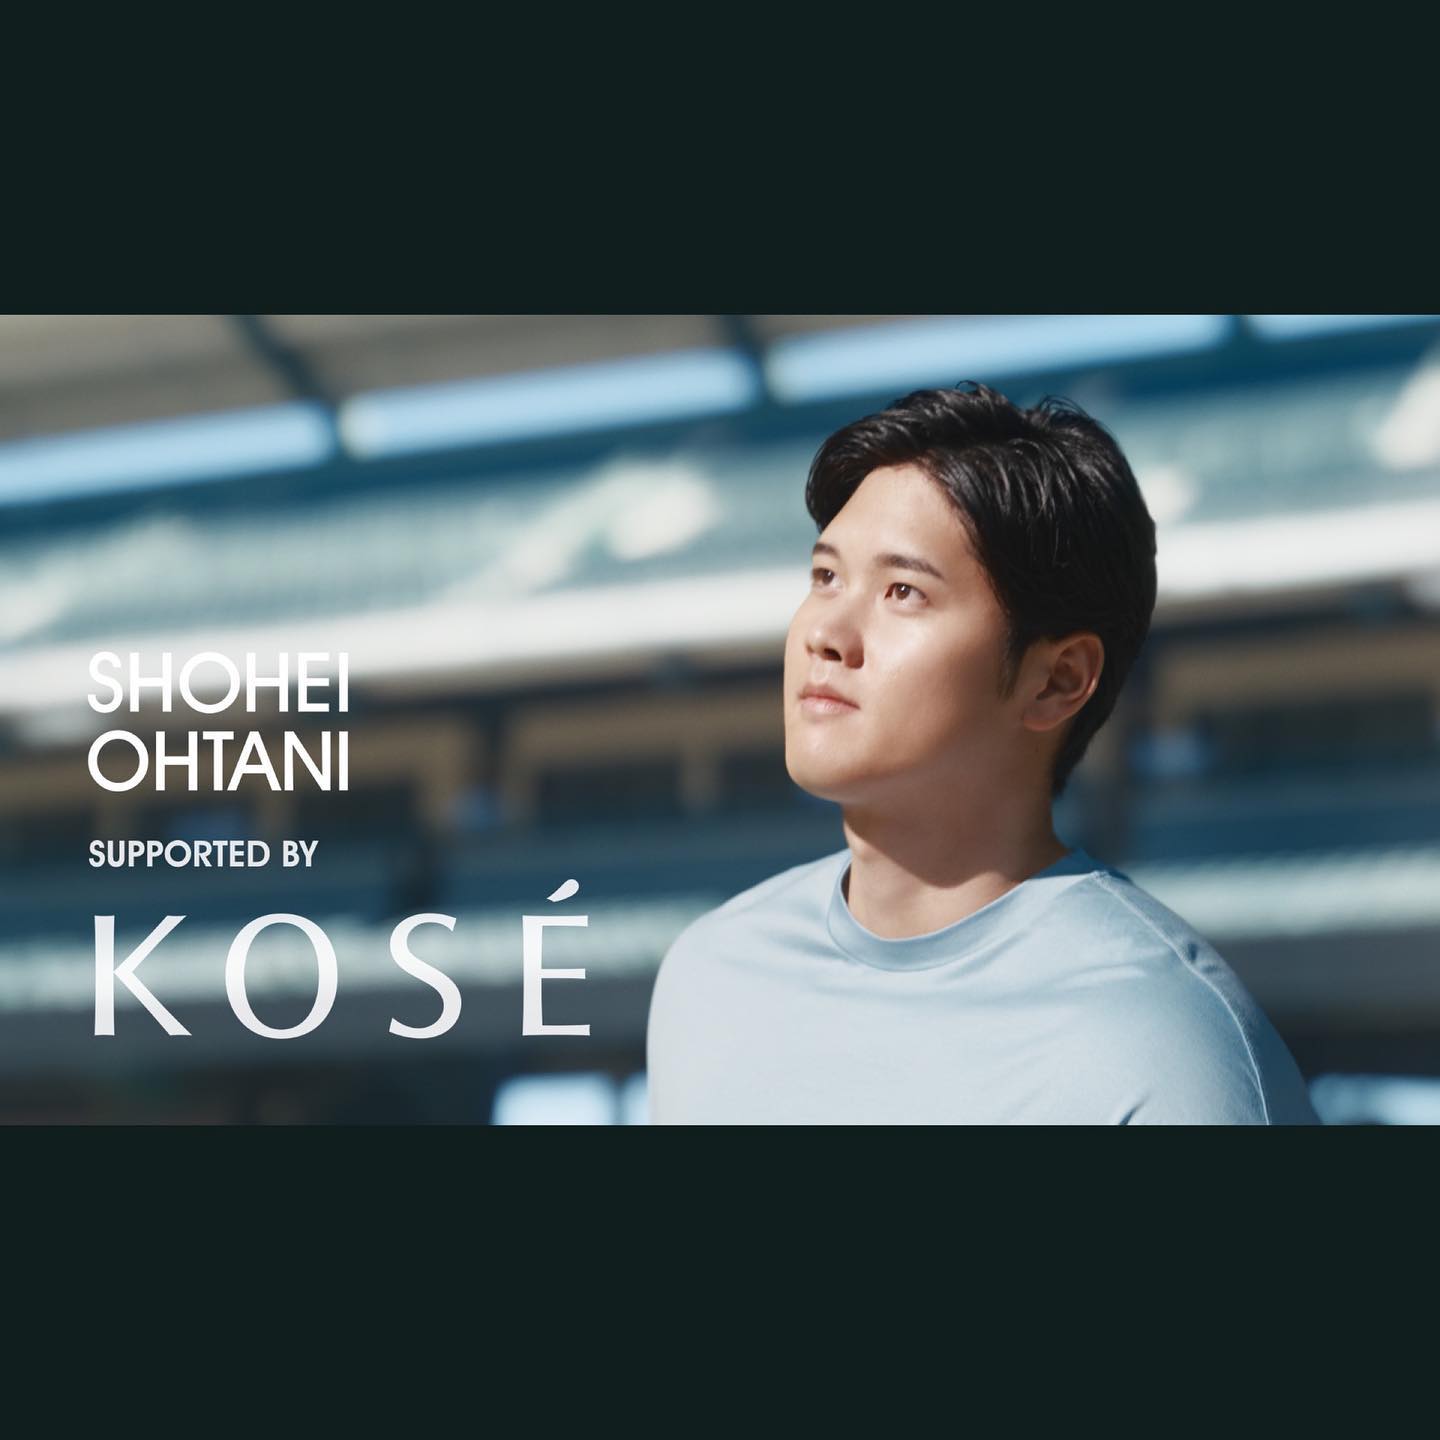 _
【Recent Work】⁣
“OHTANI VS. SUN”⁣⁣⁣⁣
⁣⁣⁣
Campaign for KOSÉ Corporation.

Baseball megastar, Shohei Ohtani stars in this spot for SEKKISEI CLEAR WELLNESS UV Sunscreen Essence Gel️

Watch the work from the link in our bio

#aoiglobal  #filmproduction  #productioncompany  #aoipro  #film  #production  #producer 